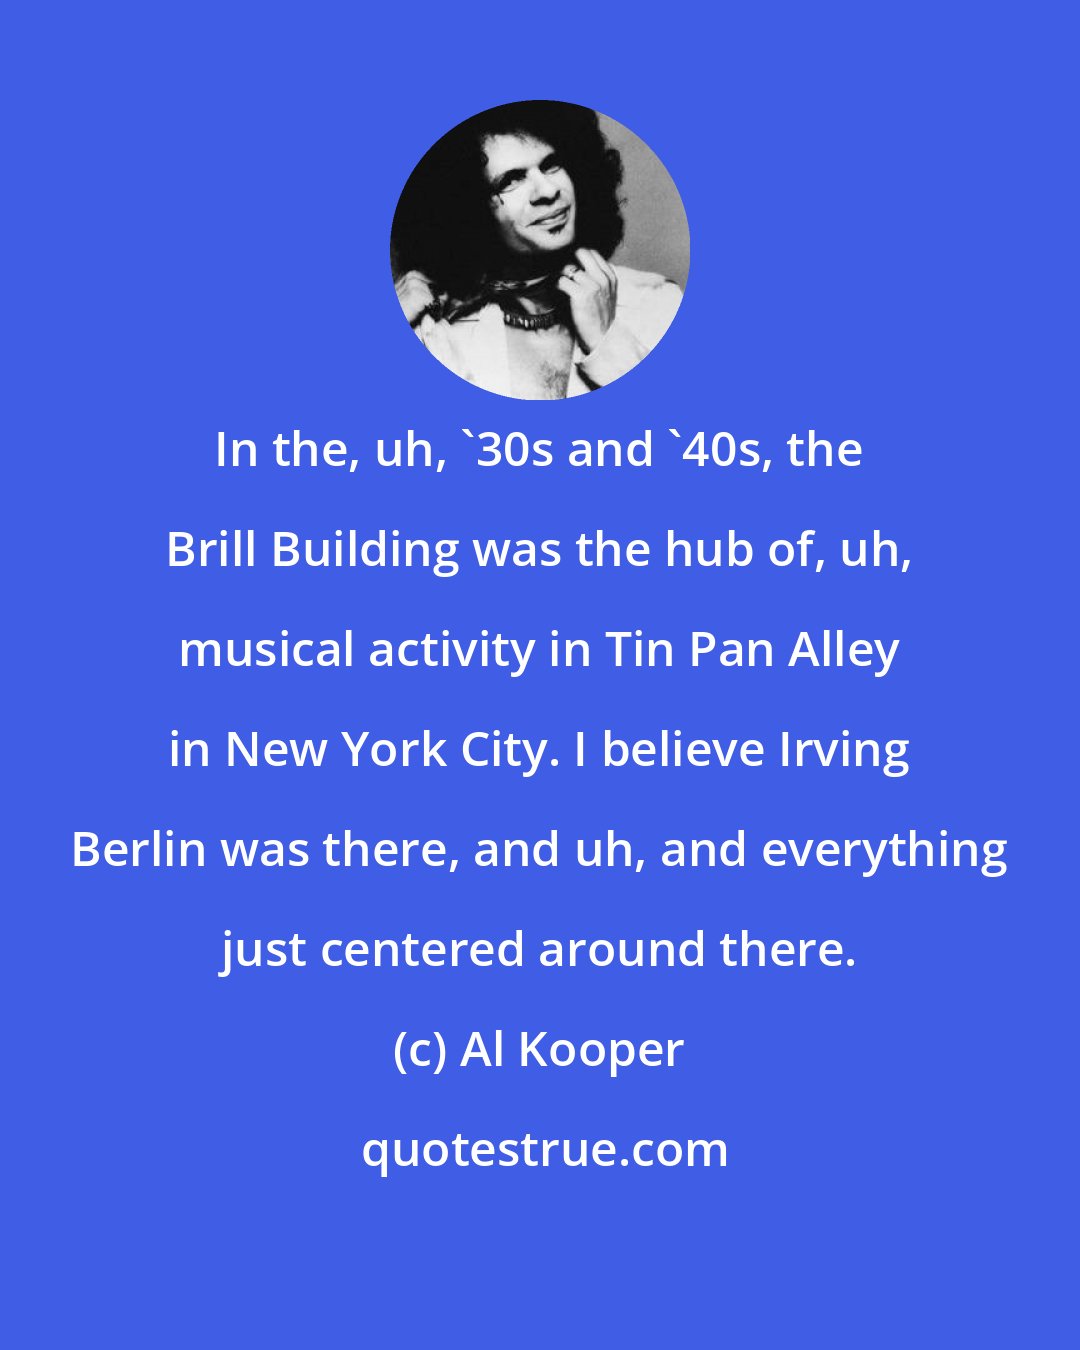 Al Kooper: In the, uh, '30s and '40s, the Brill Building was the hub of, uh, musical activity in Tin Pan Alley in New York City. I believe Irving Berlin was there, and uh, and everything just centered around there.